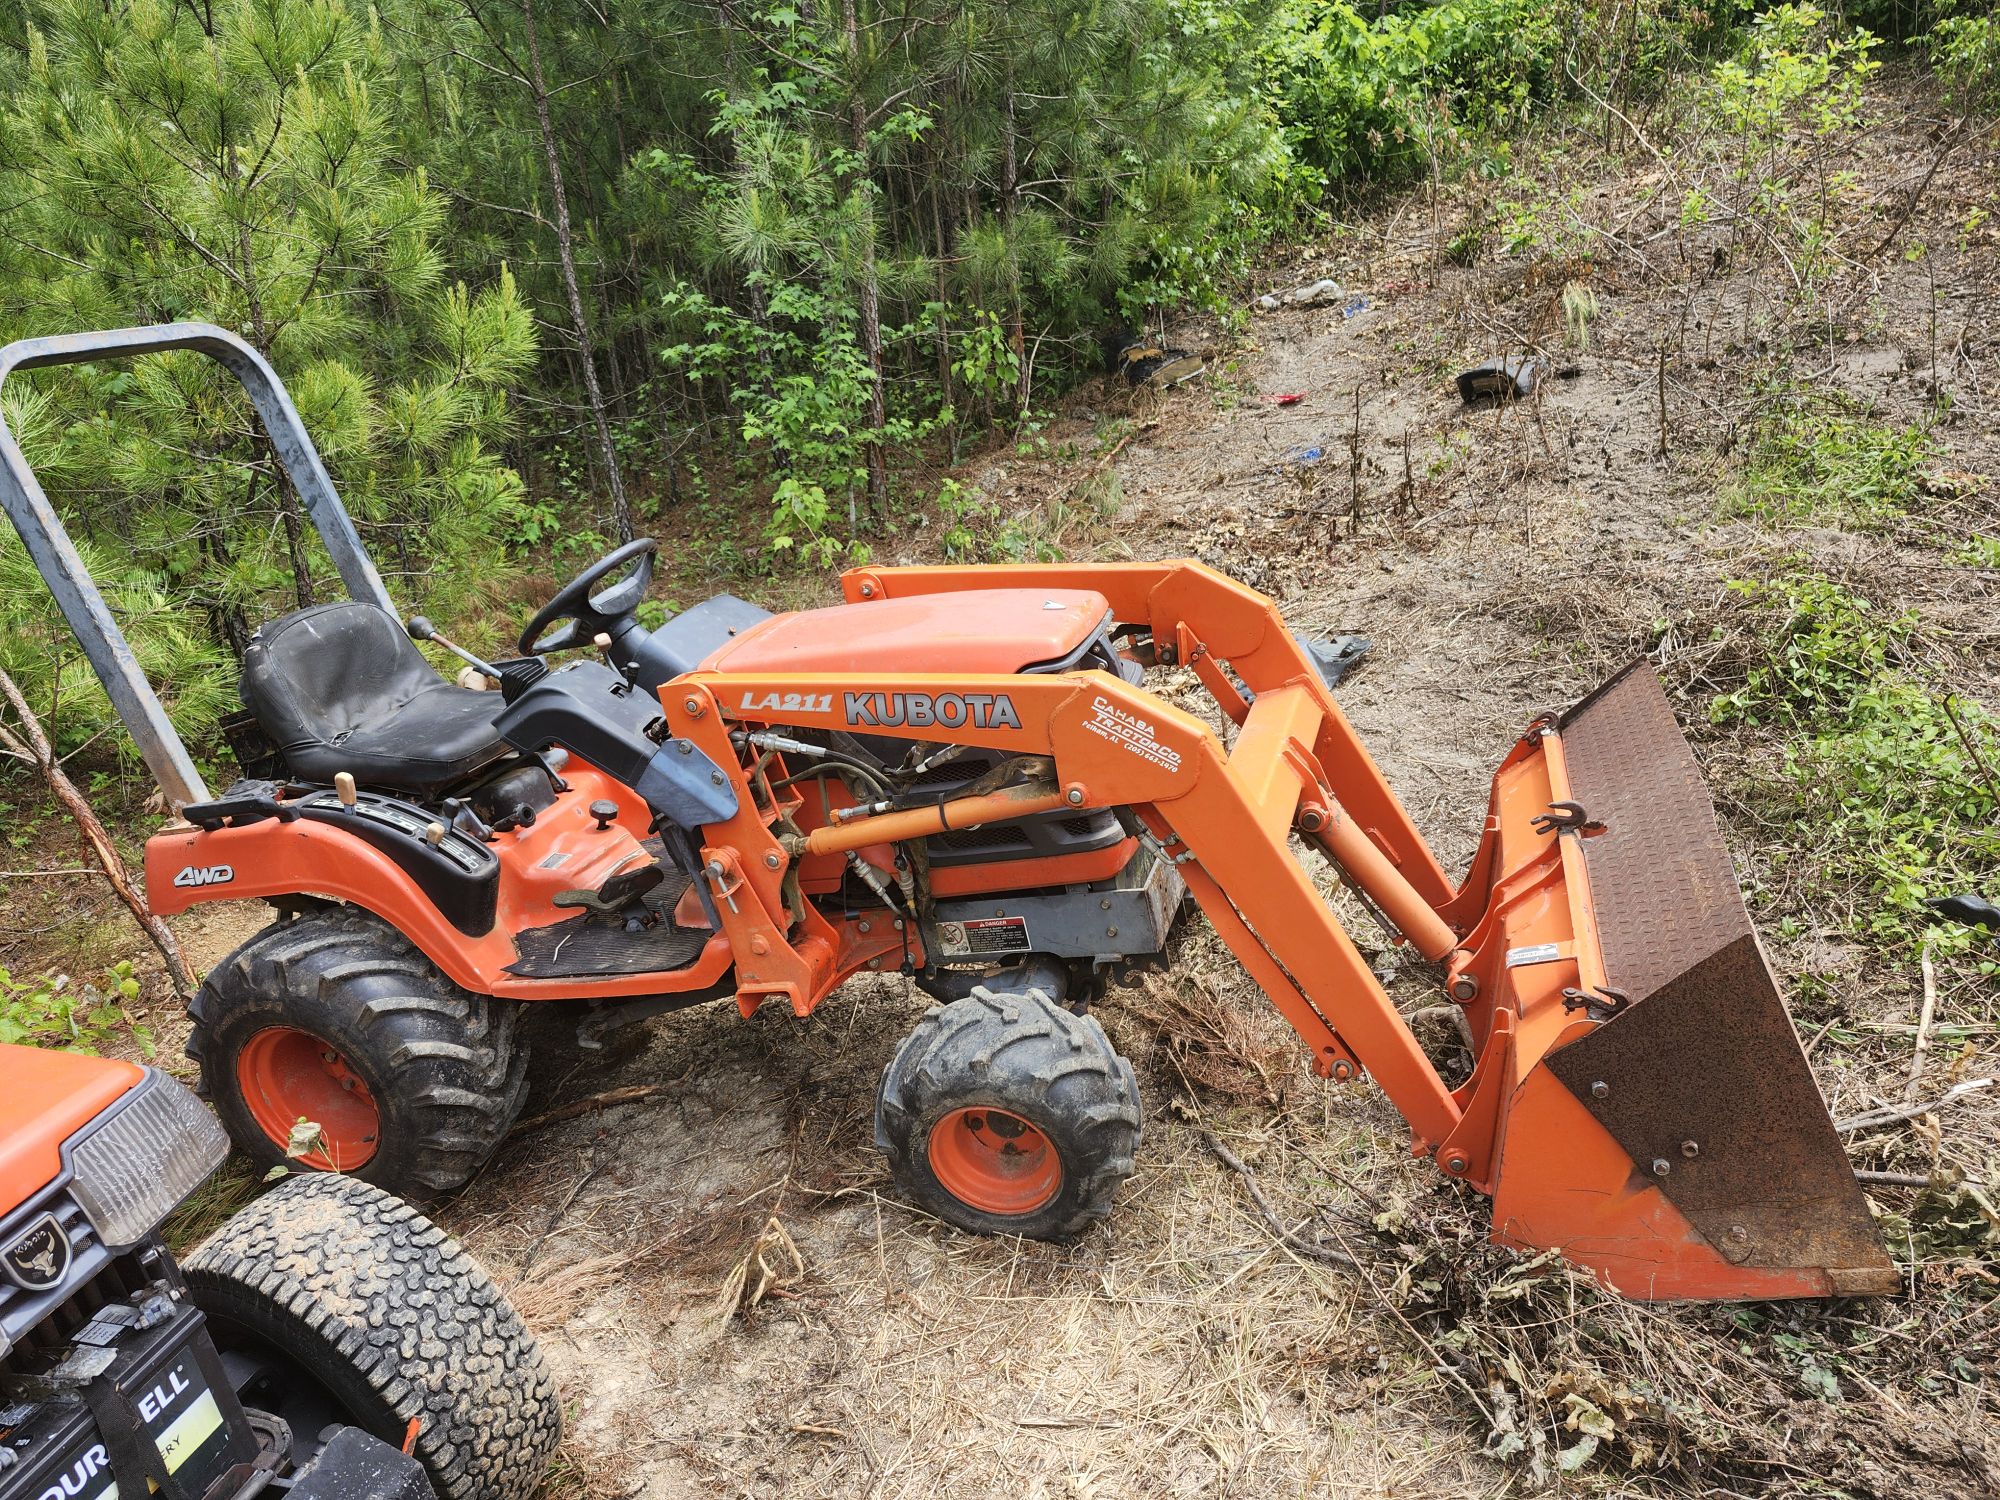 Kubota BX1800 full part out.  Good la211 loader. D722 engine. Good tranmission. Lots of good salvageable used parts. Shipping available. No freight